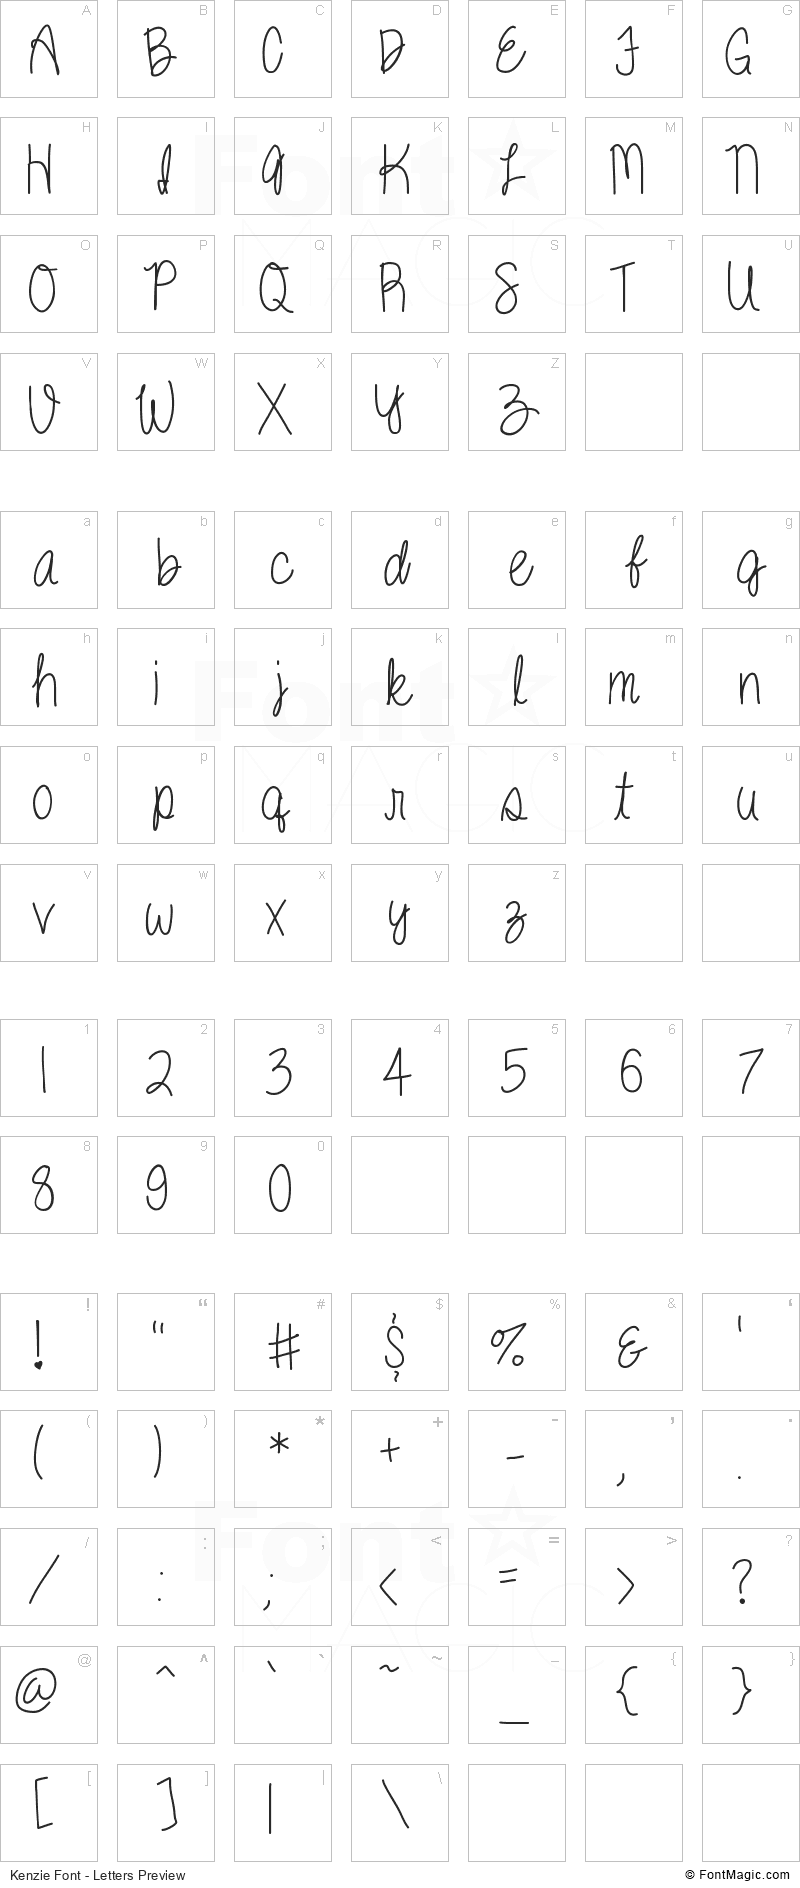 Kenzie Font - All Latters Preview Chart